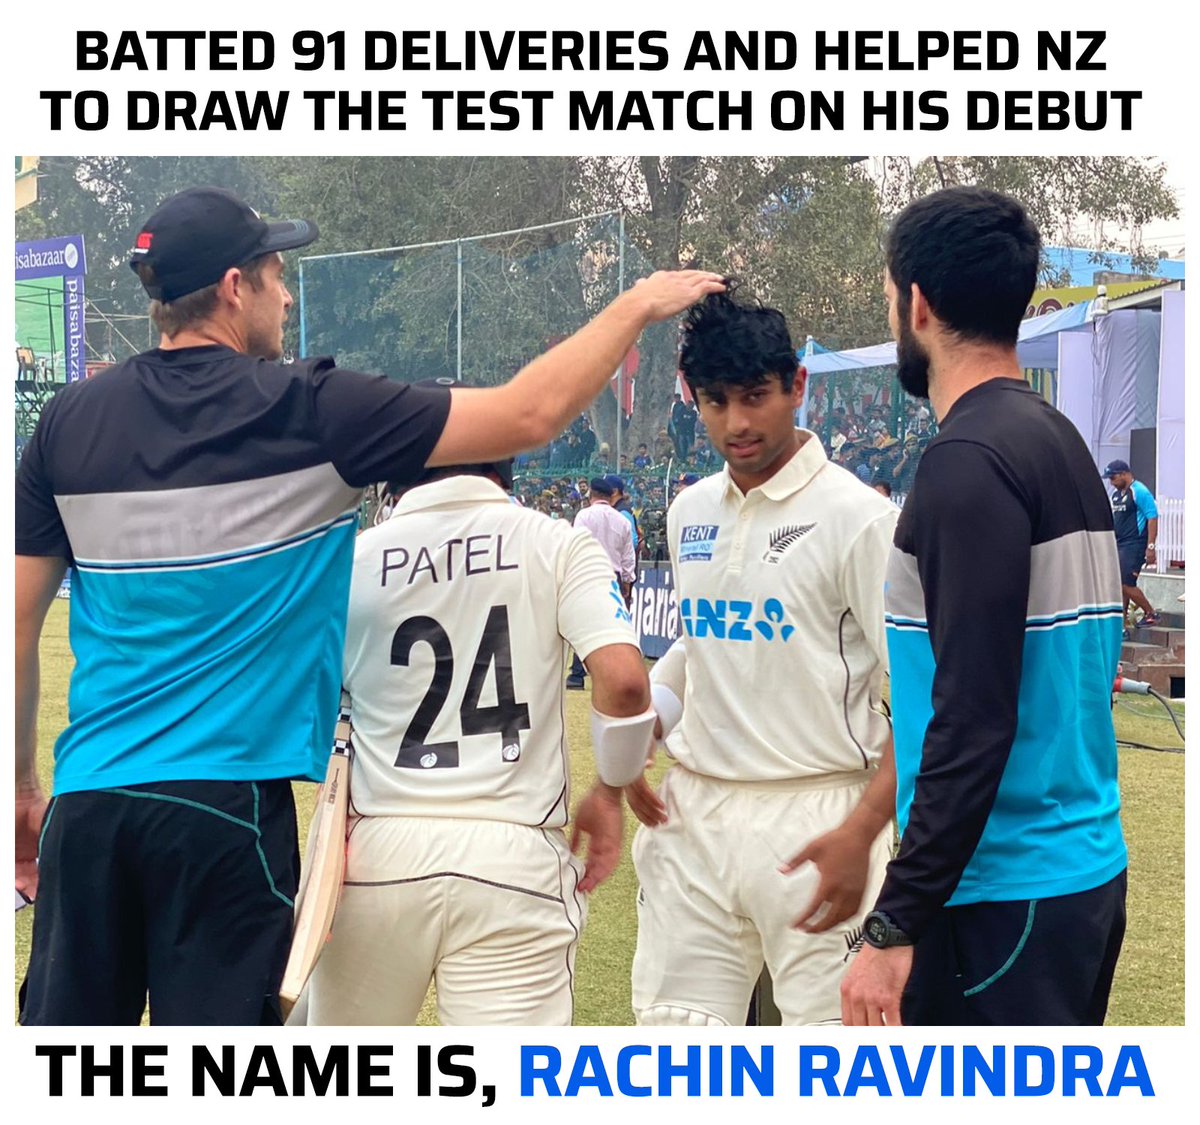 Rachin Ravindra who is named after Rahul Dravid and Sachin Tendulkar saved the Test on his debut.

📸: Blackcaps

#INDvNZ